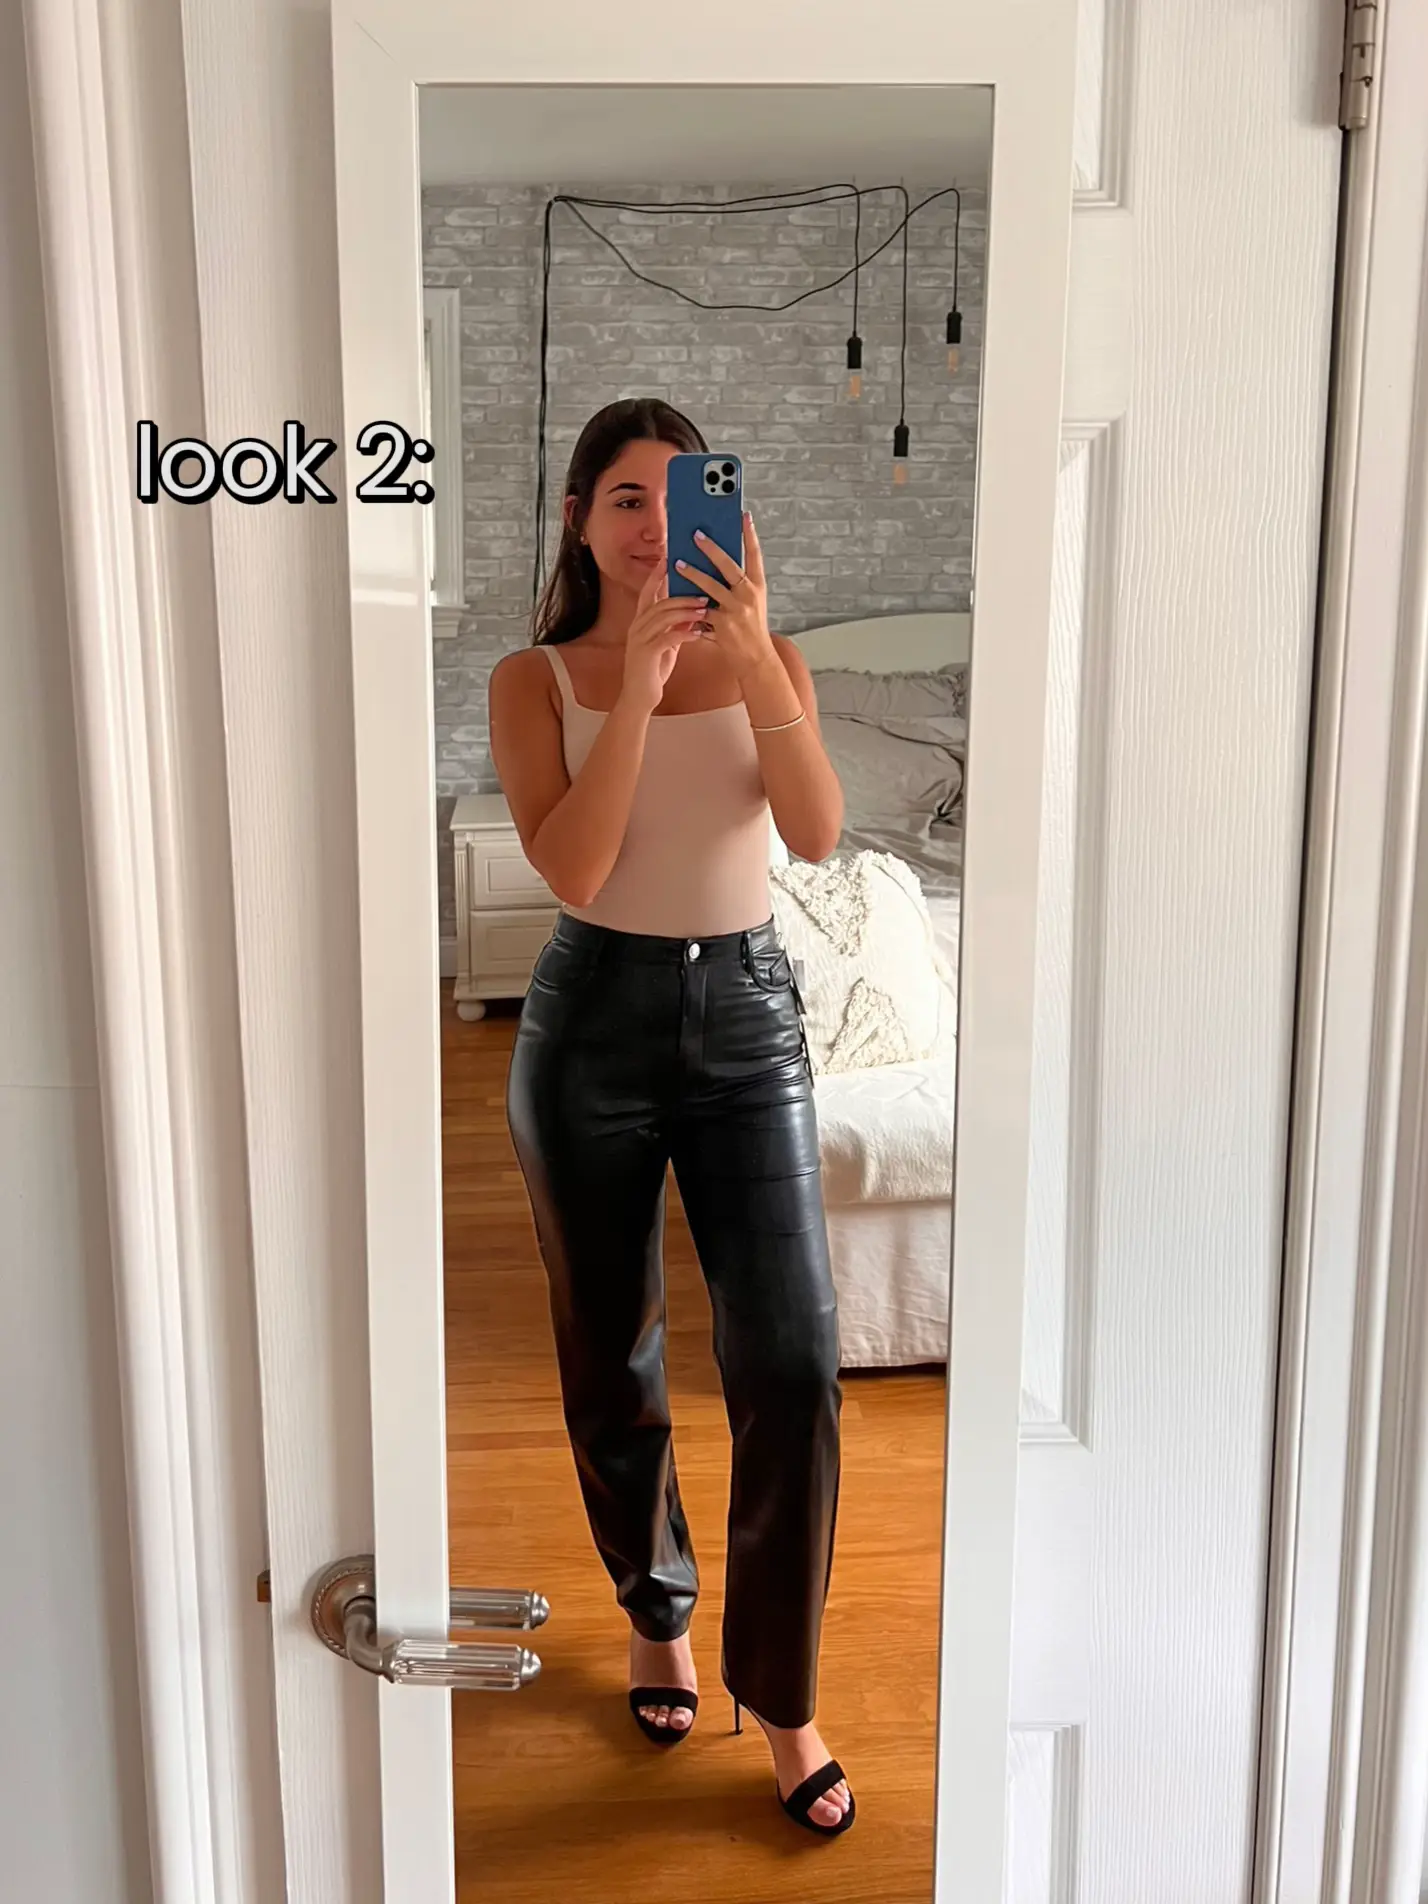 ARITZIA LEATHER PANTS HAUL (MELINA PANT vs. BABATON - Which is the Best?) 